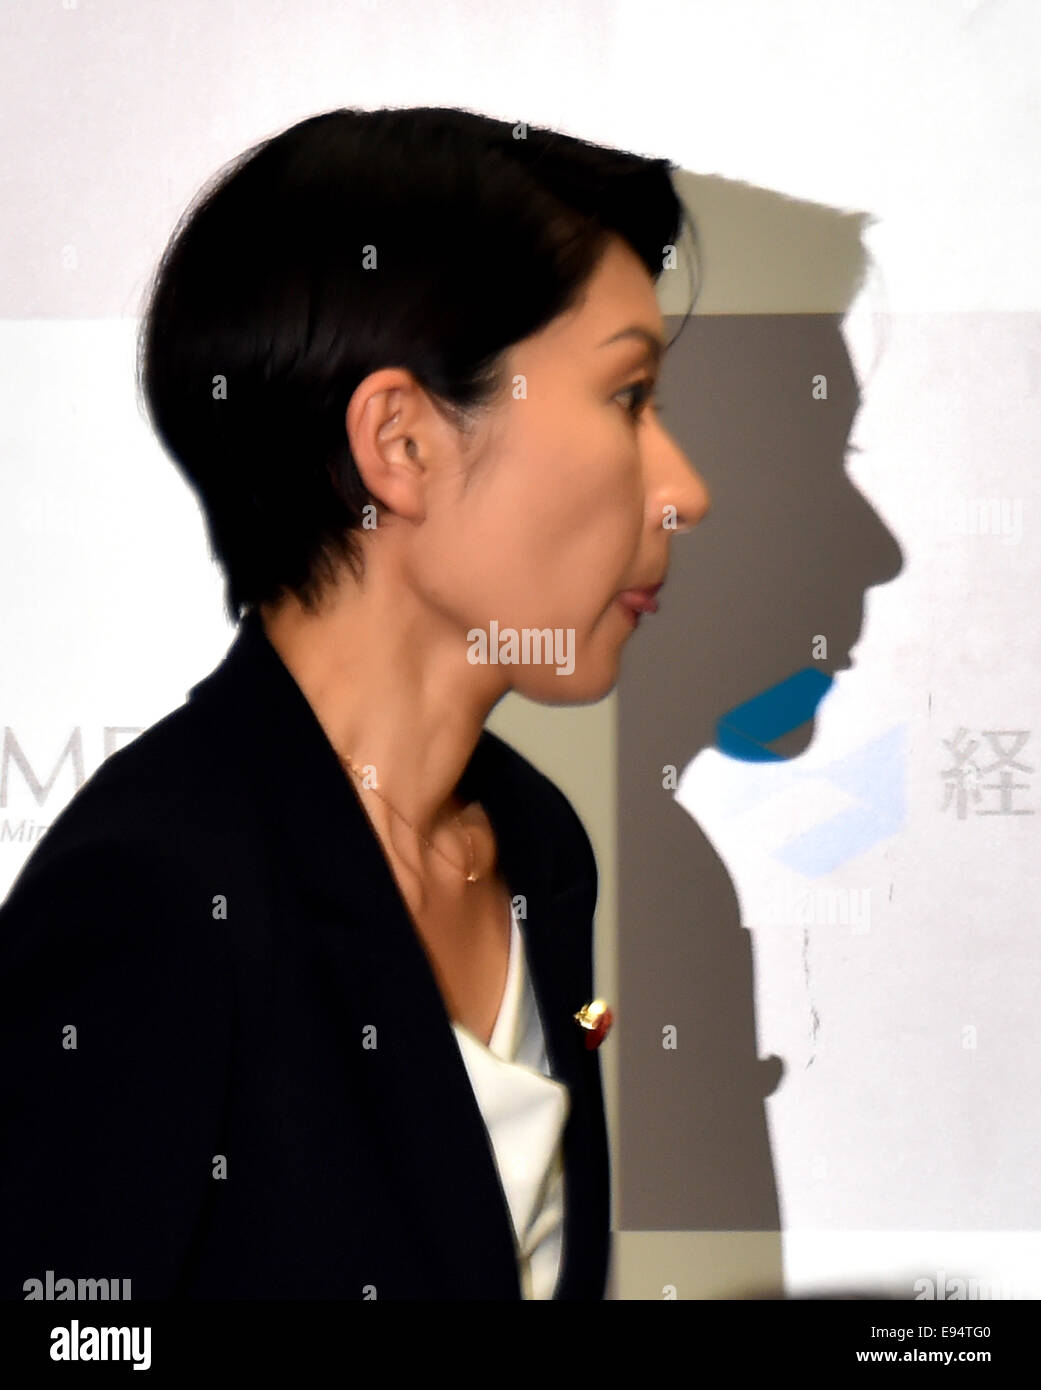 Tokyo, Japan. 20th Oct, 2014. Japan's Trade and Industry Minister Yuko Obuchi leaves a news conference at the ministry in Tokyo on Monday, October 20, 2014. Obuchi, a daughter of late Prime Minister Keizo Obuchi, submitted her letter of resignation to Prime Minister Shinzo Abe, taking her responsibility over the alleged misuse of political funds. The resignation will deal a severe blow to Abe, who appointed five women as new Cabinet ministers when he reshuffled his Cabinet on Sept. 3 in his bid to underline his aim of promoting the status of women in Japan.(Photo by Natsuki Sakai/AFLO/Alamy) Stock Photo